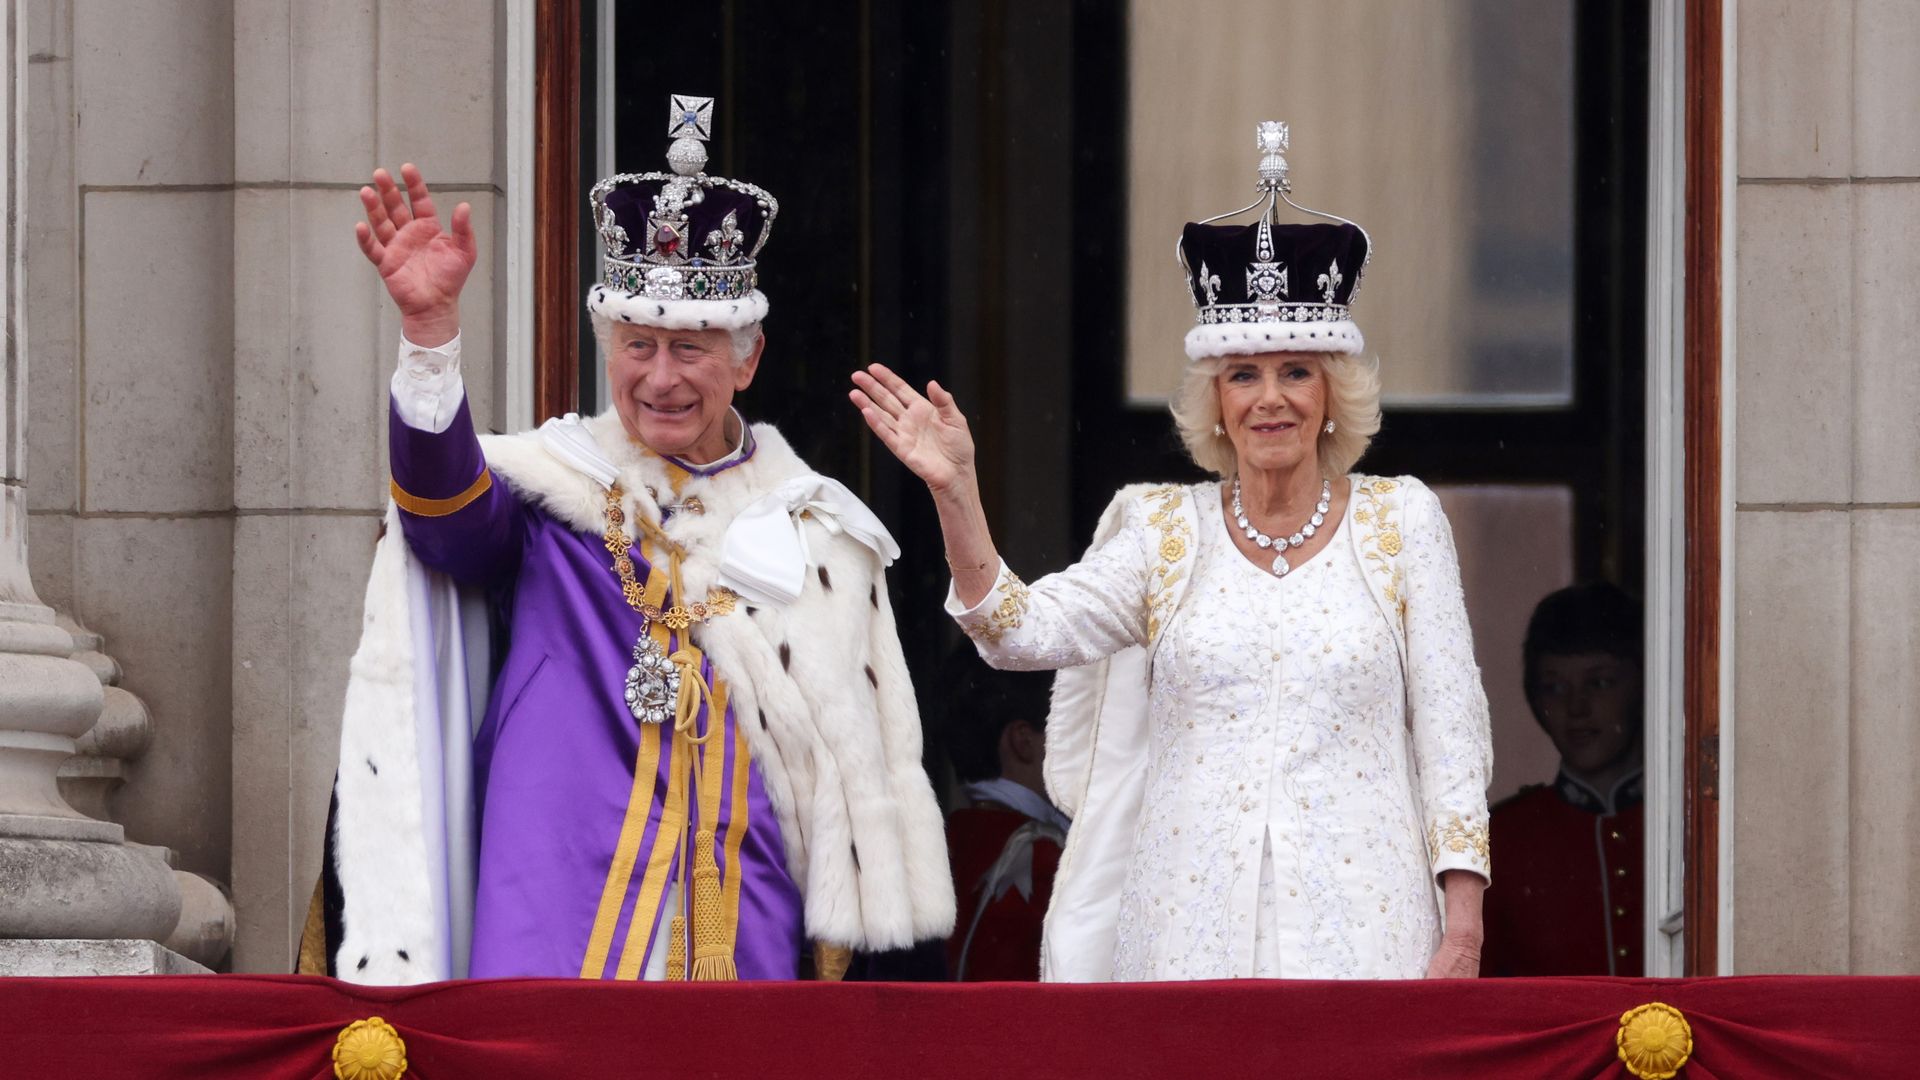 The newly-crowned King and Queen wave to the crowds